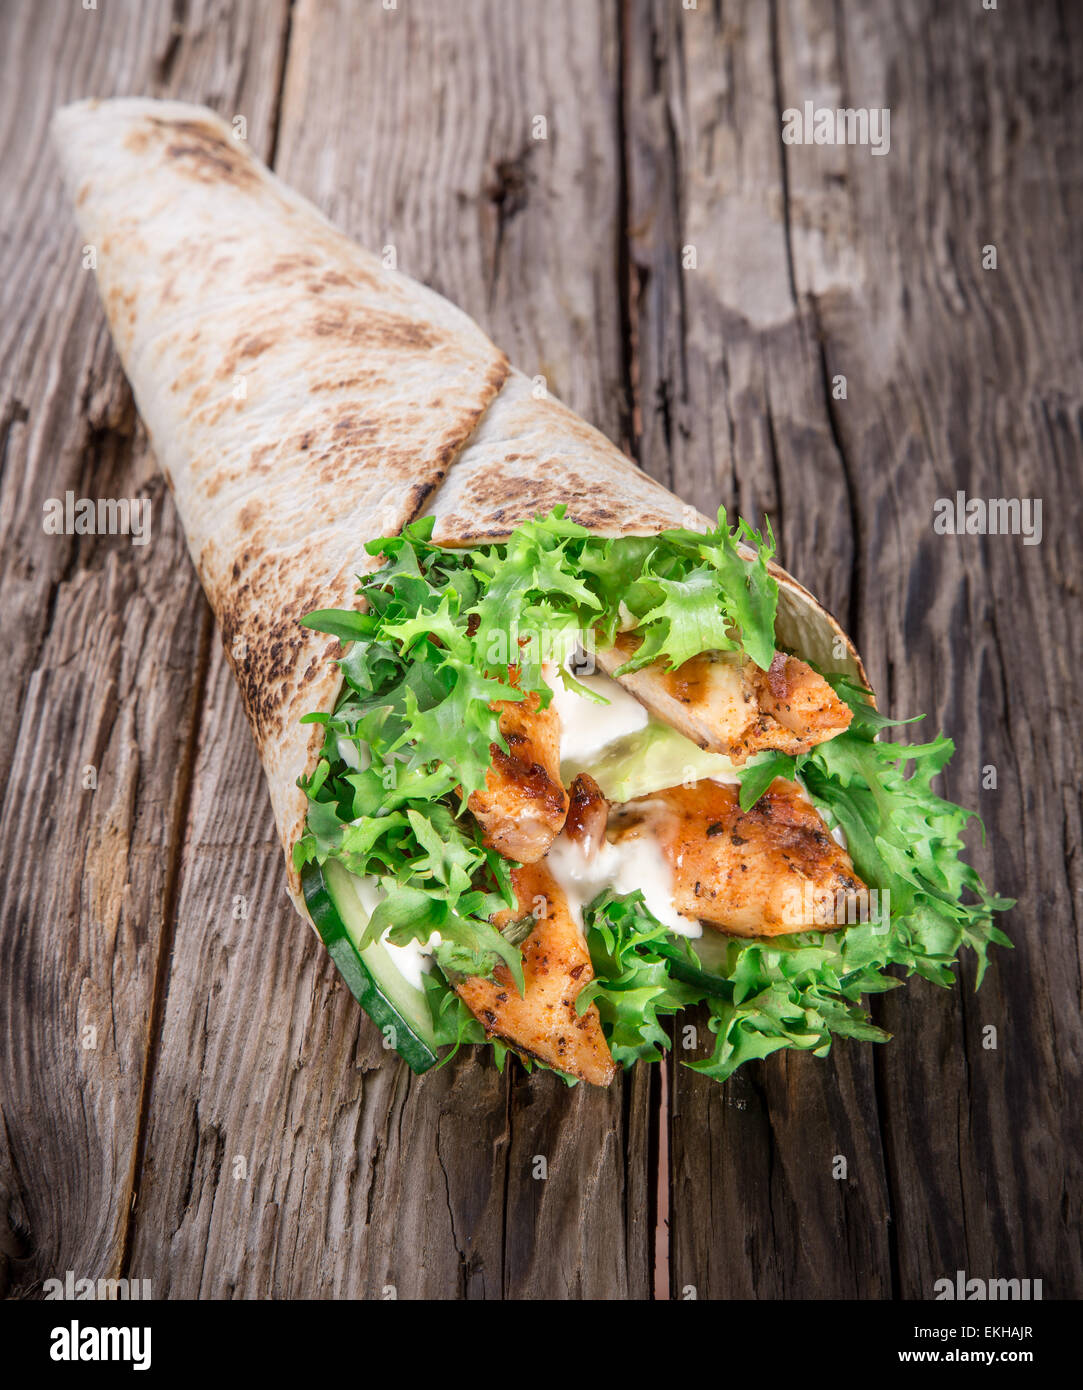 Chicken slices in a Tortilla Wrap with Lettuce on wood. Stock Photo